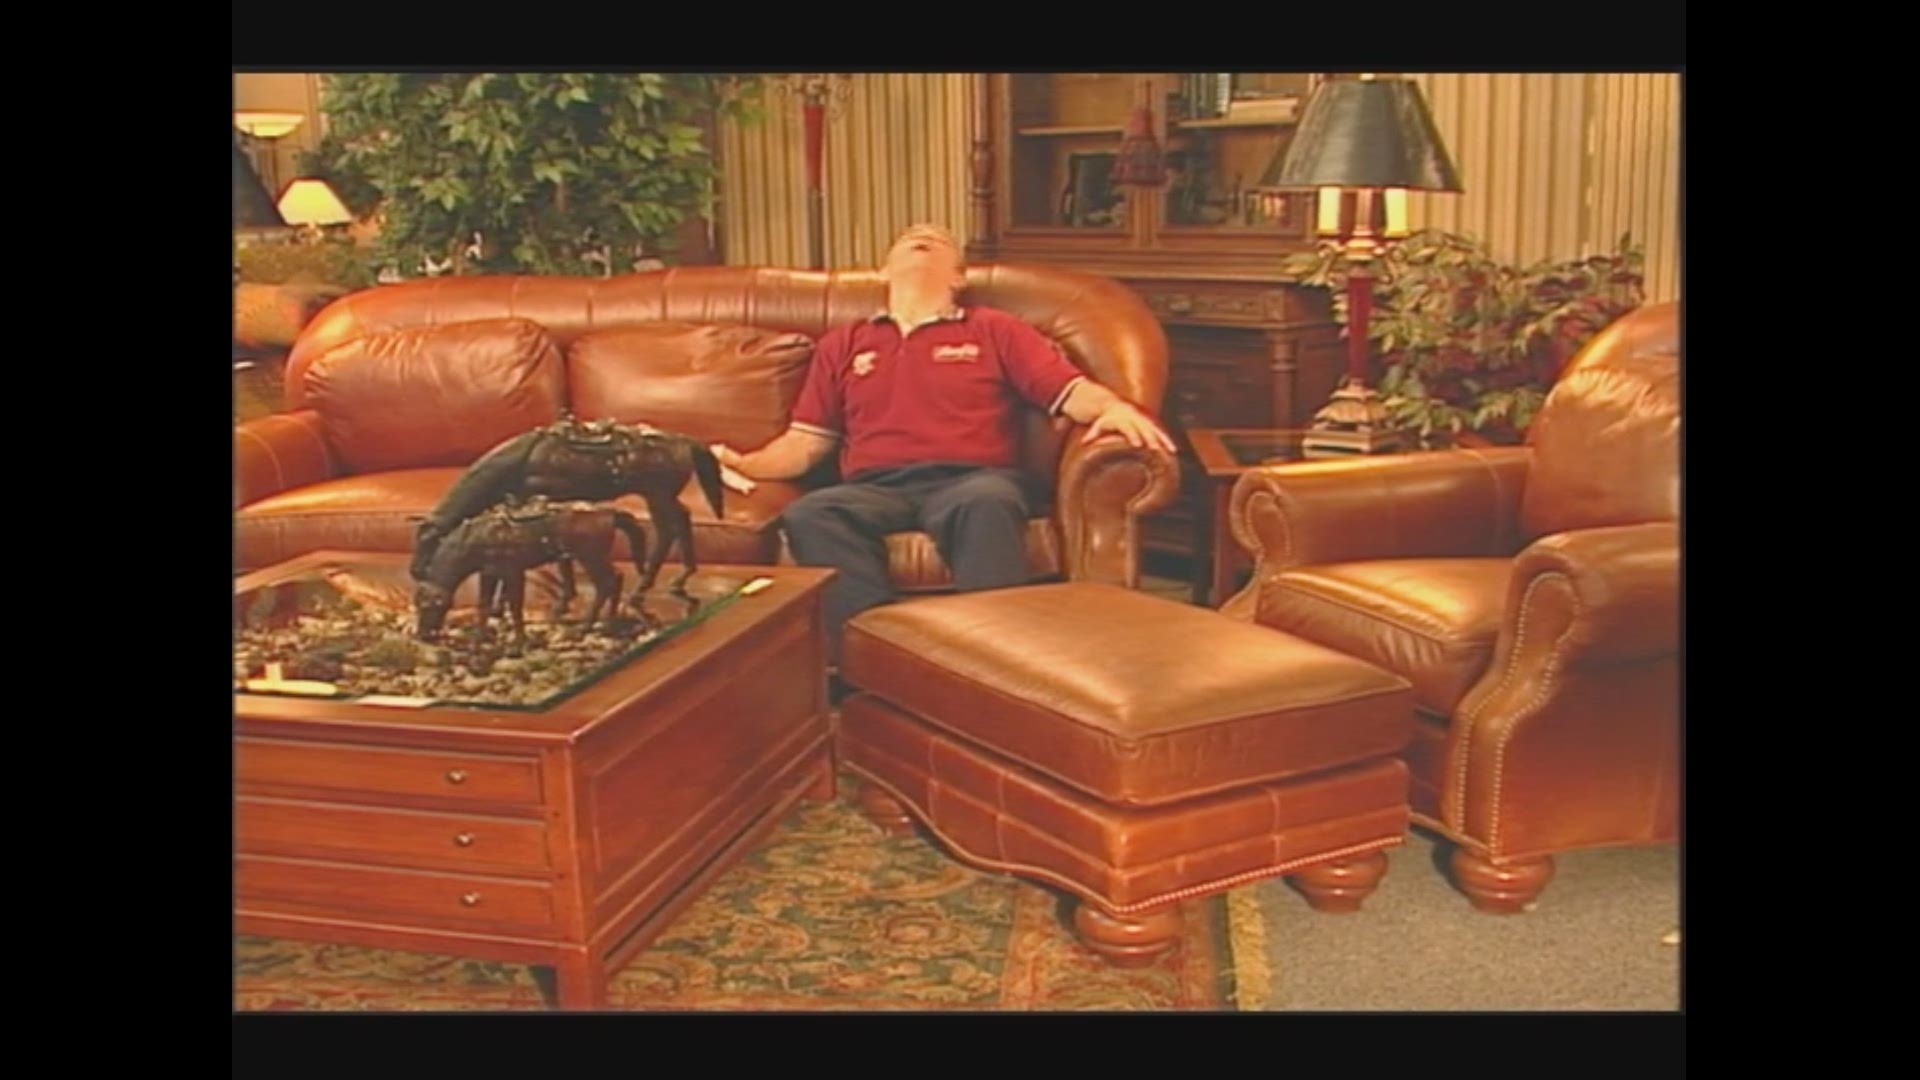 Mattress Mack made a name for himself with his outlandish TV over the years. Here are some outtakes that never made the air. (Video provided by Love Advertising/Gallery Furniture)